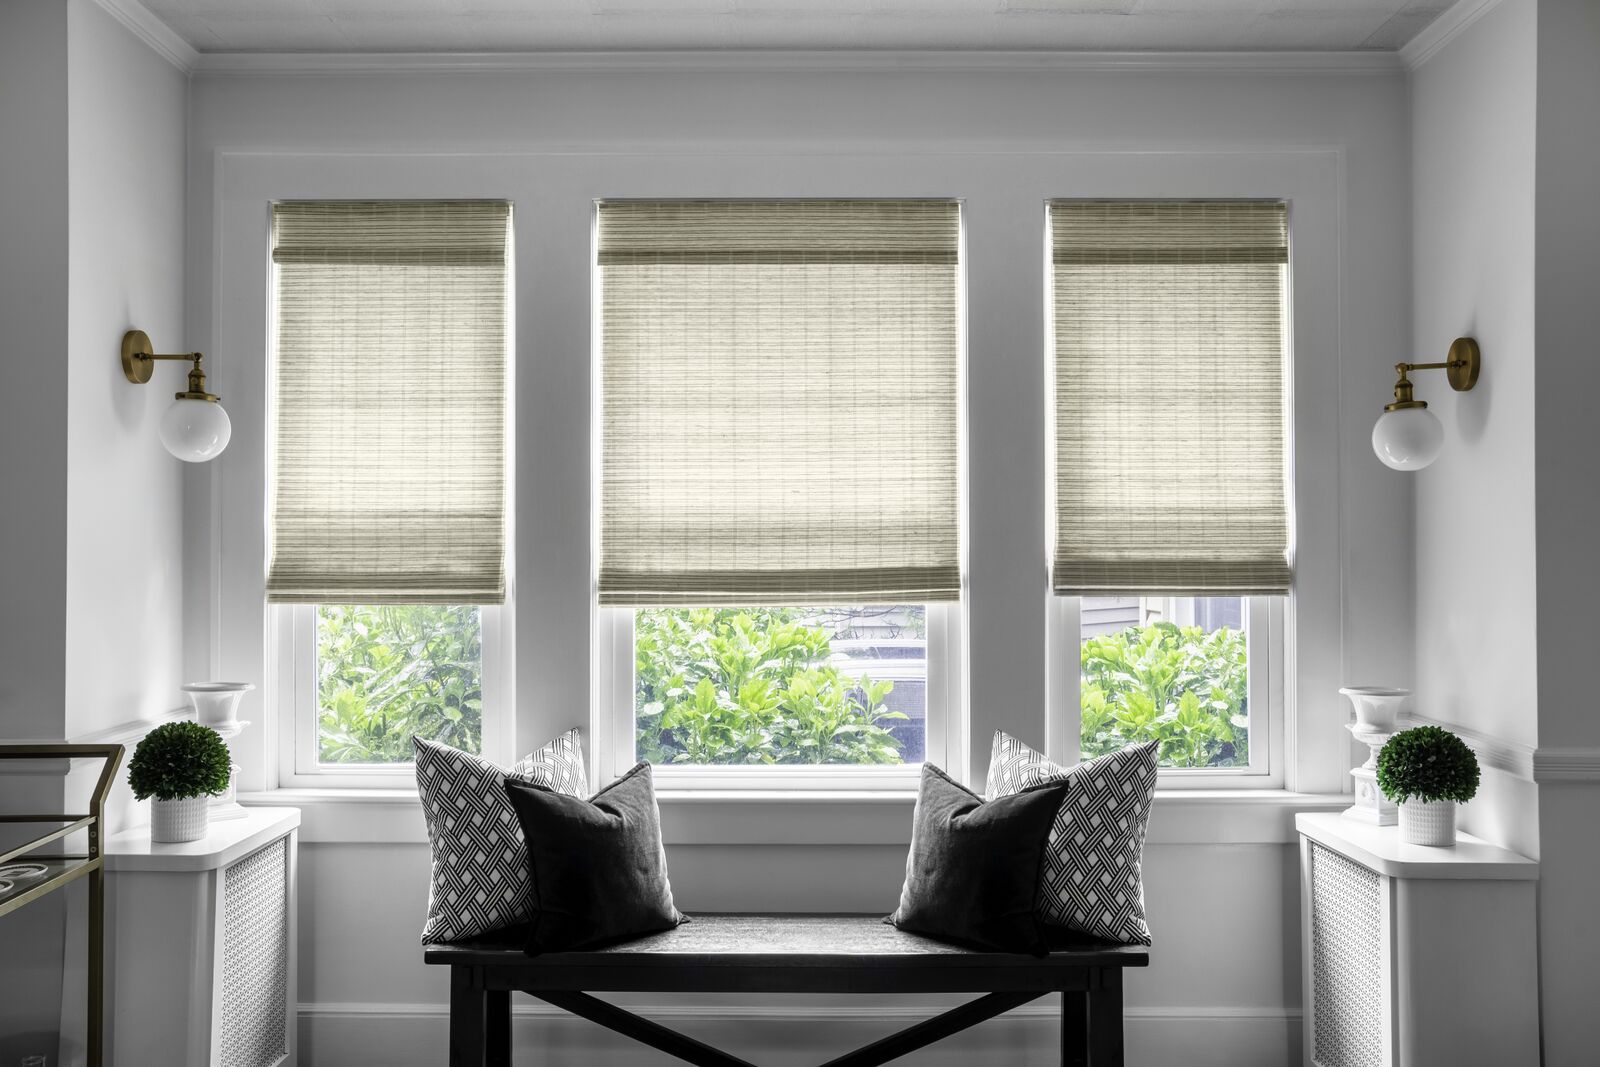 Tan woven wood shades cover three windows in a modern entryway.